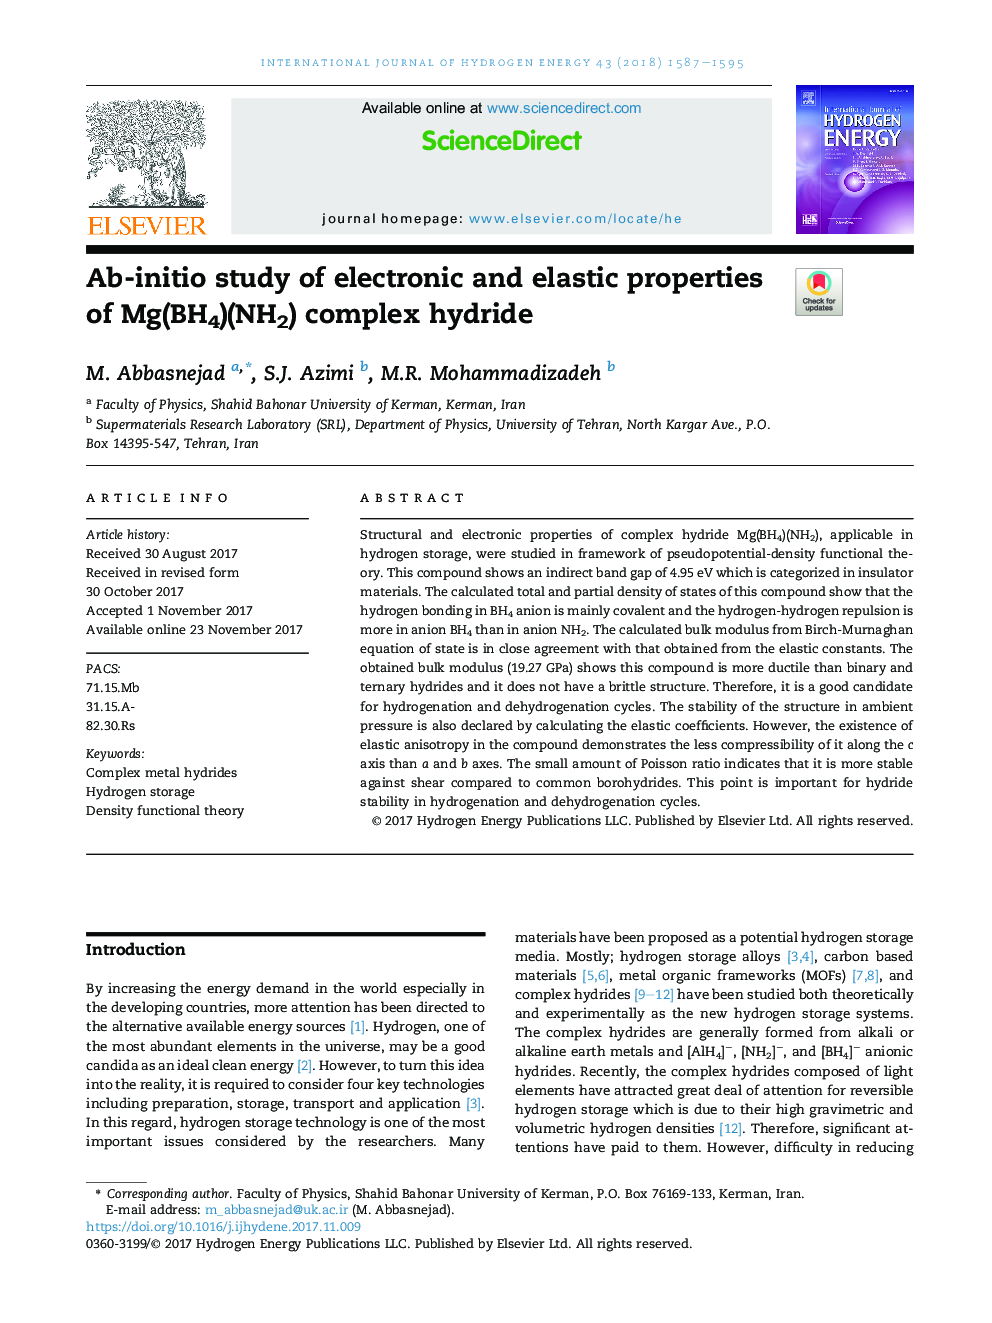 Ab-initio study of electronic and elastic properties of Mg(BH4)(NH2) complex hydride